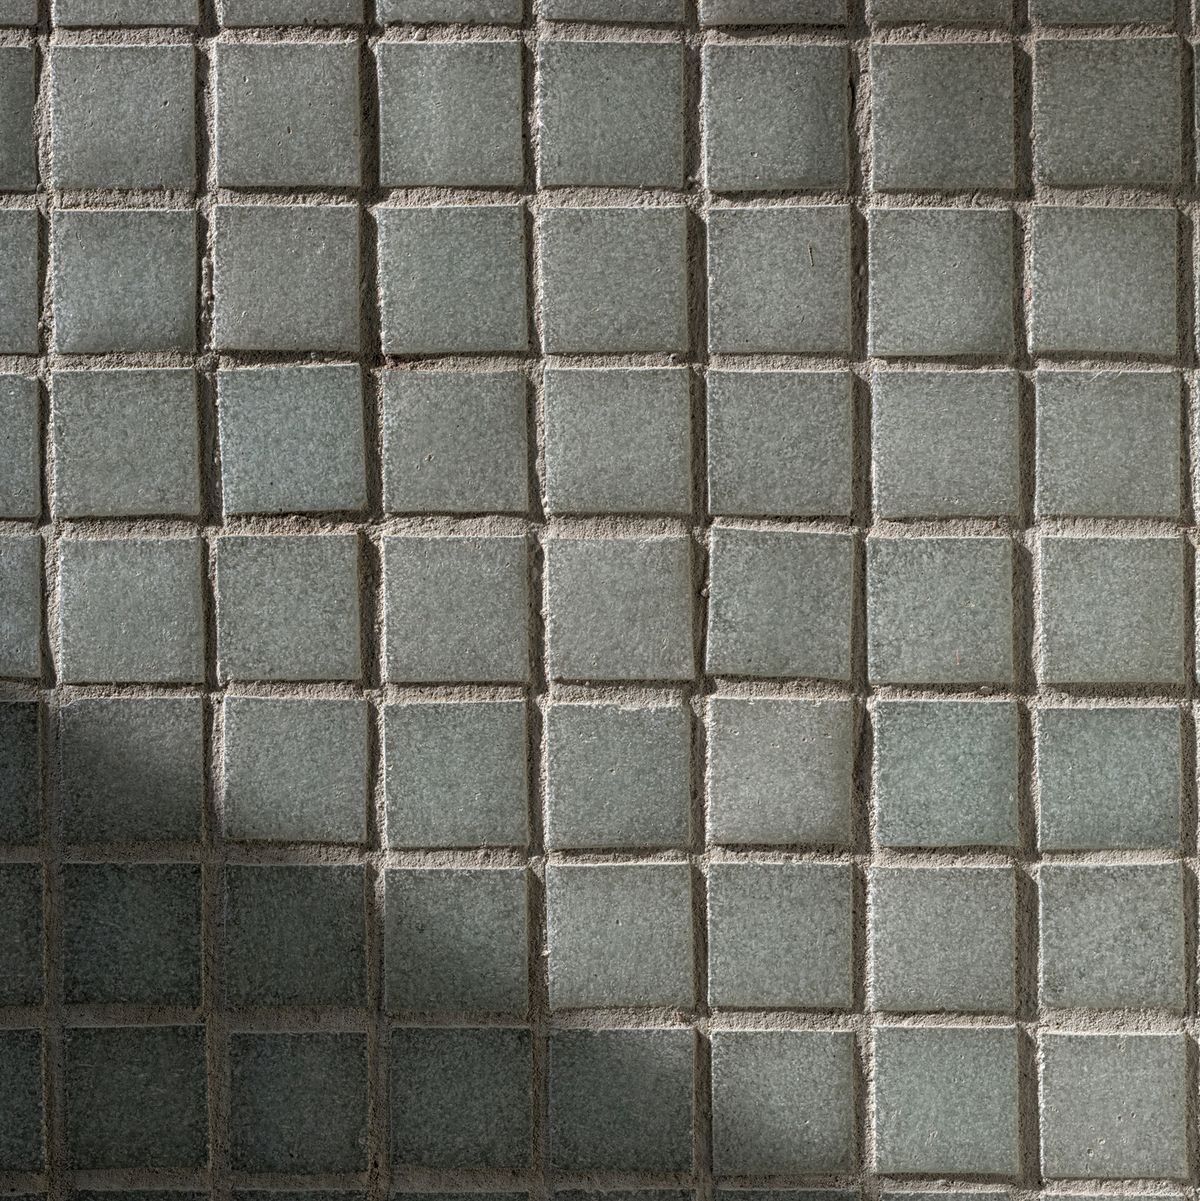 https://hips.hearstapps.com/hmg-prod/images/slated-shadow-across-the-wall-of-a-tiled-shower-royalty-free-image-1628879863.jpg?crop=0.66213xw:1xh;center,top&resize=1200:*